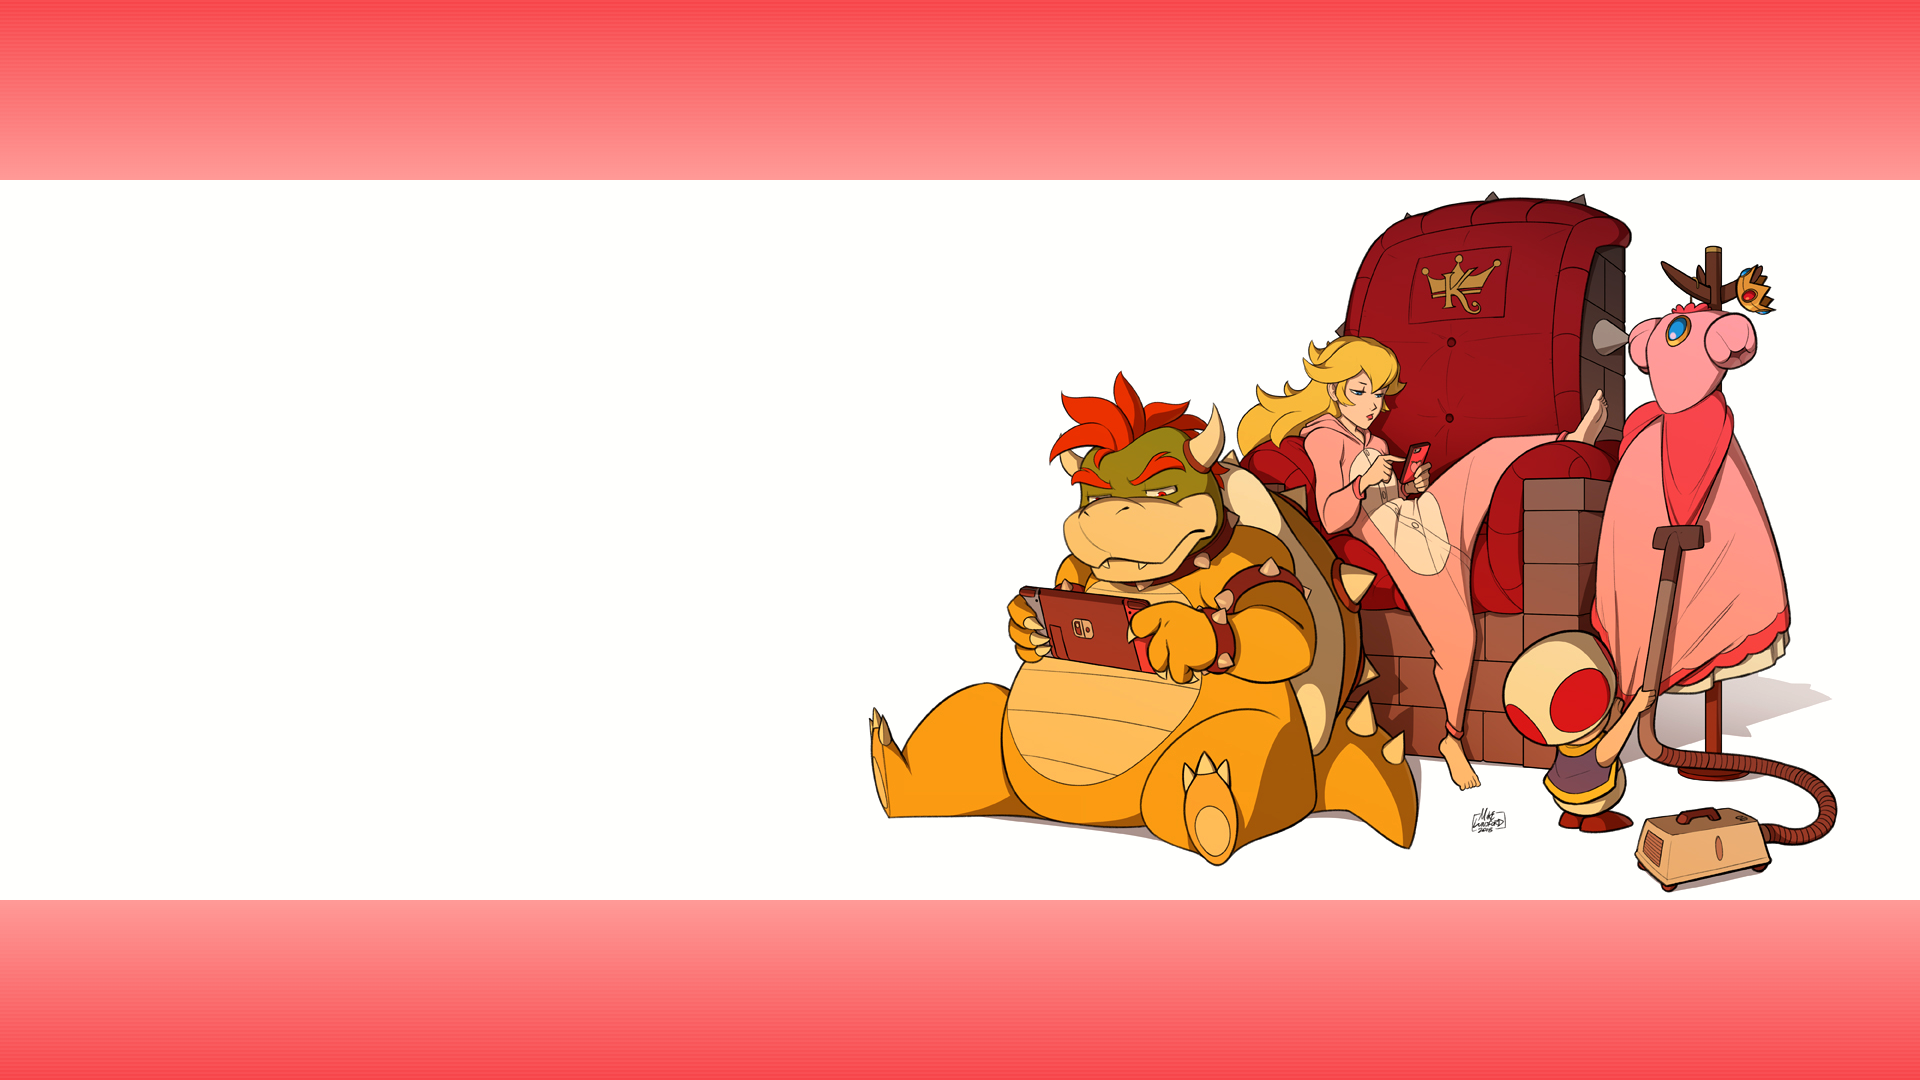 Anime 1920x1080 Super Mario Mario Bros. Princess Peach Bowser Toad (character) blonde long hair mushroom Nintendo Nintendo Switch phone smartphone crown dress pink dress jewel jewelry sitting couch throne vacuum cleaner reptiles Koopa redhead horns fangs claws Super Smash Brothers pyjamas pink pyjamas onesie boredom video games video game girls cleaning